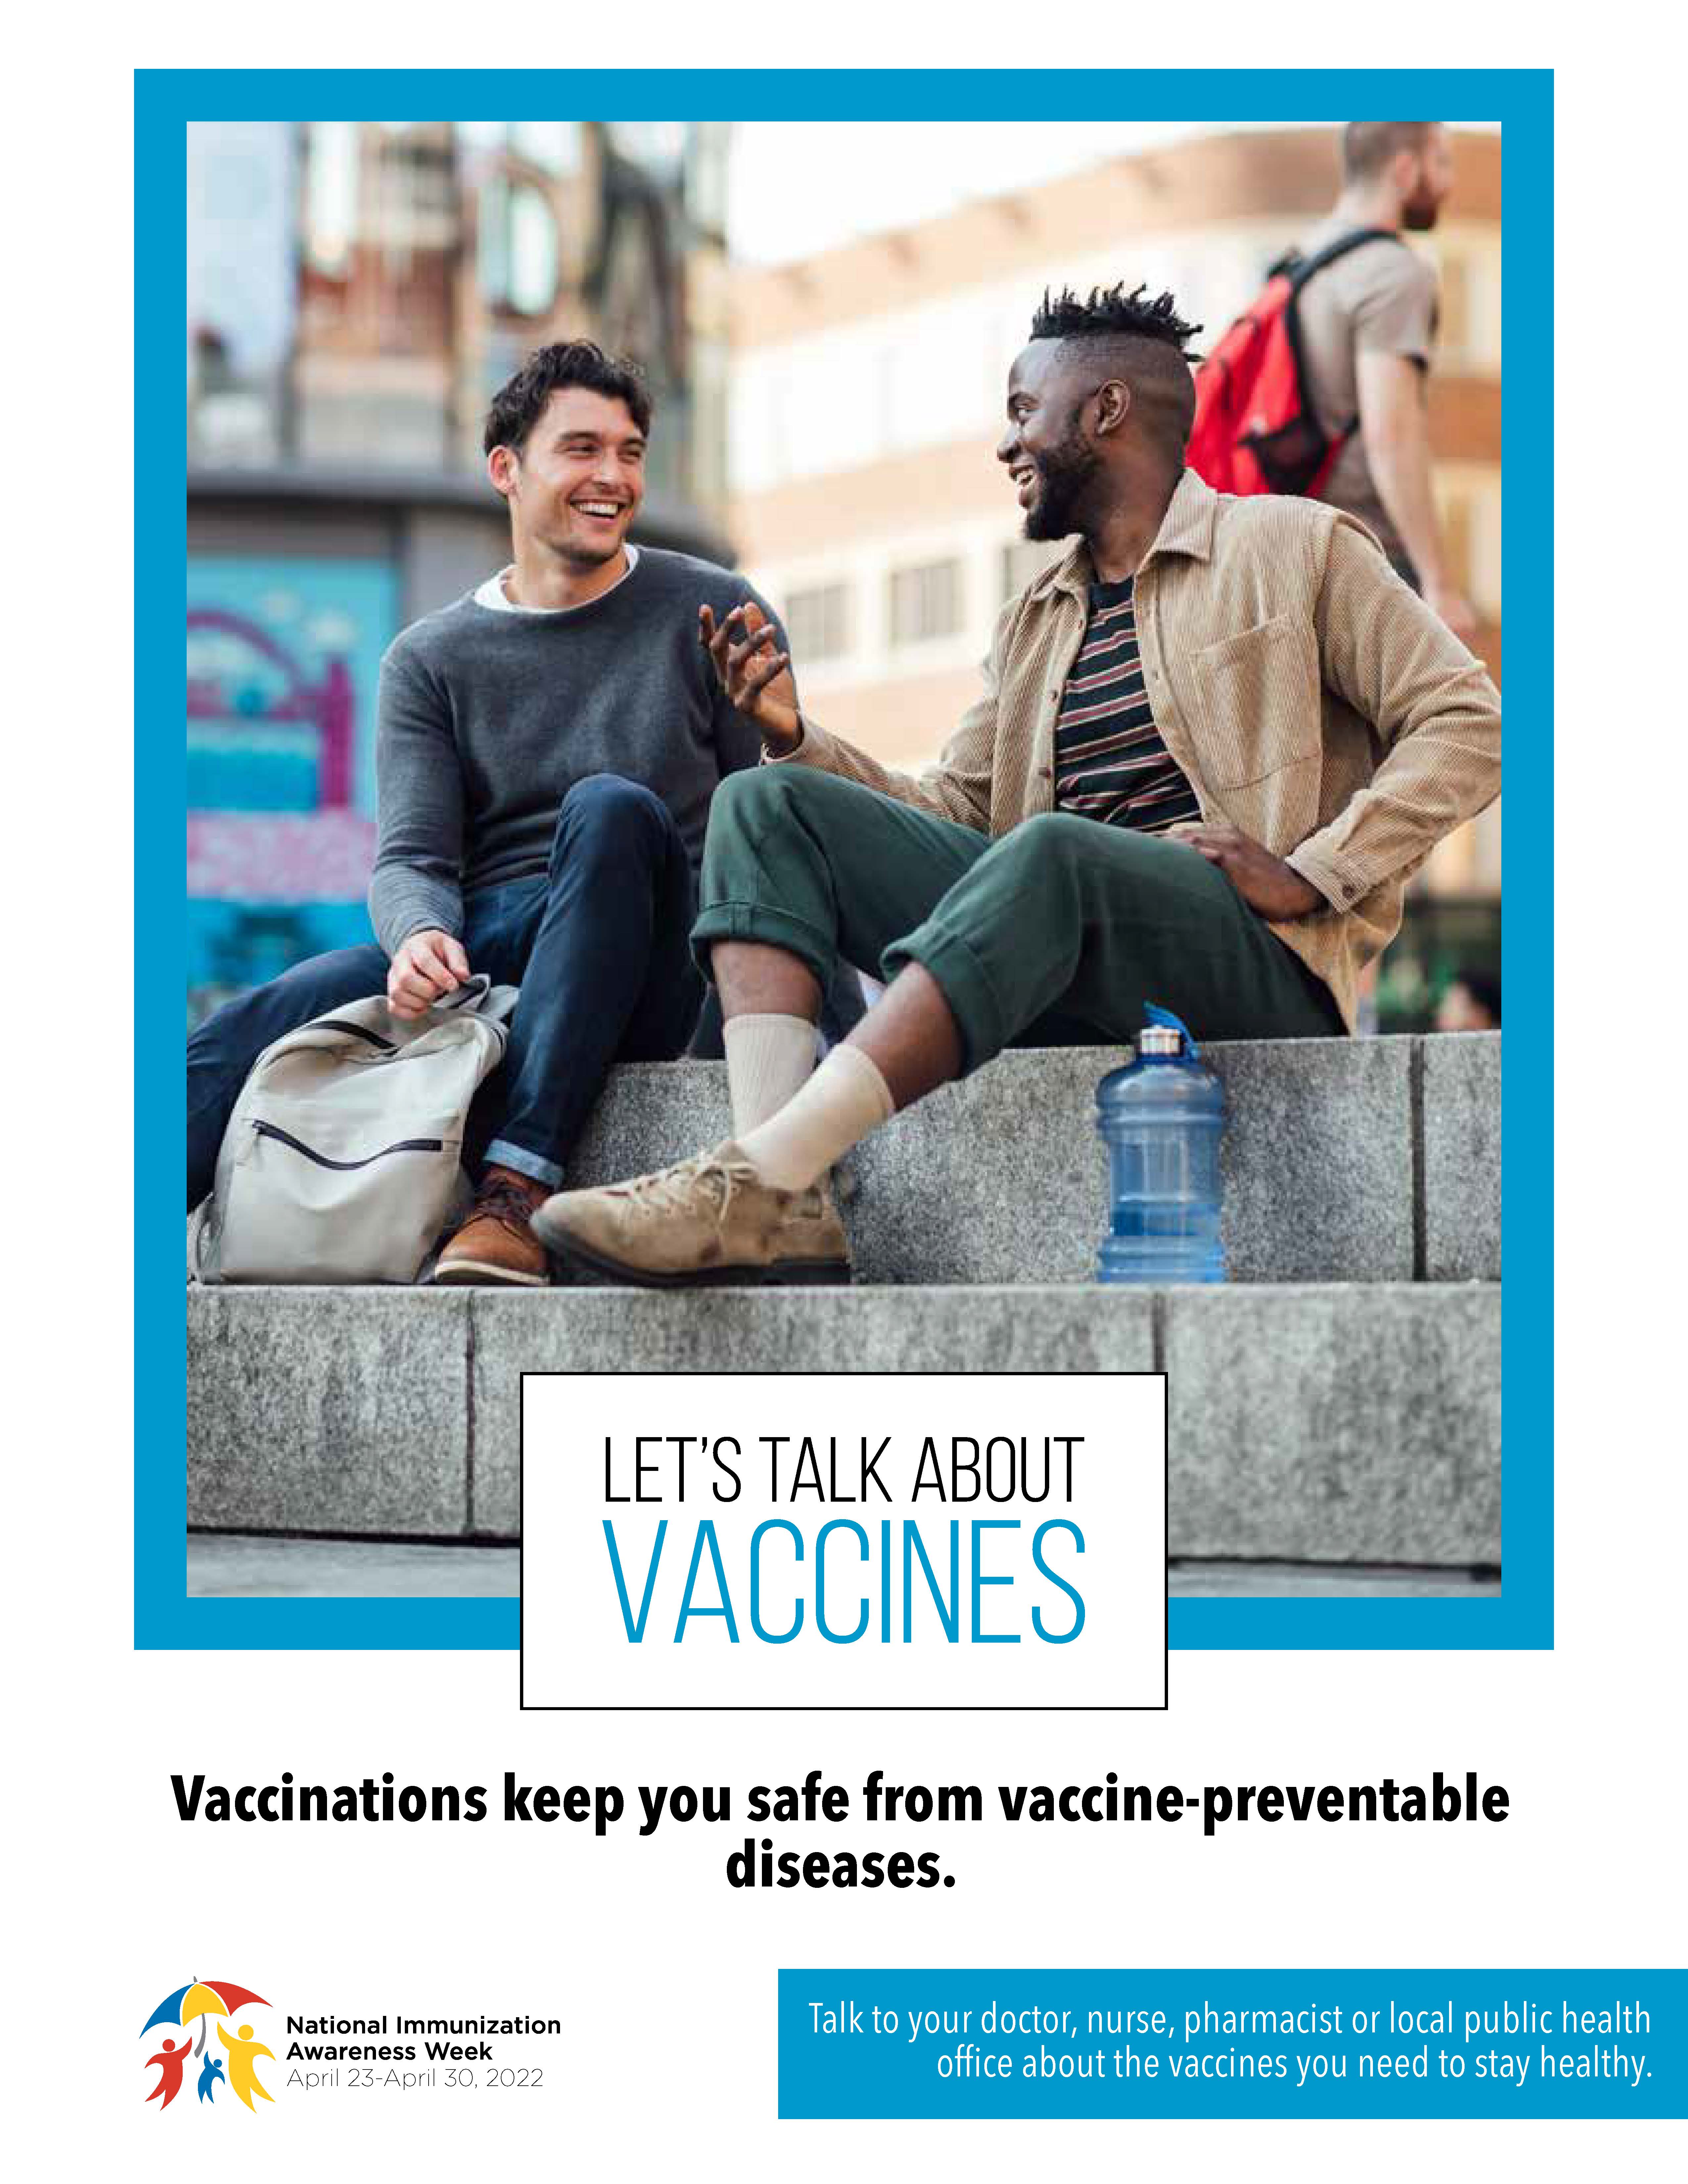 Let's talk about vaccines - Vaccinations keep you safe from vaccine-preventable diseases - poster B